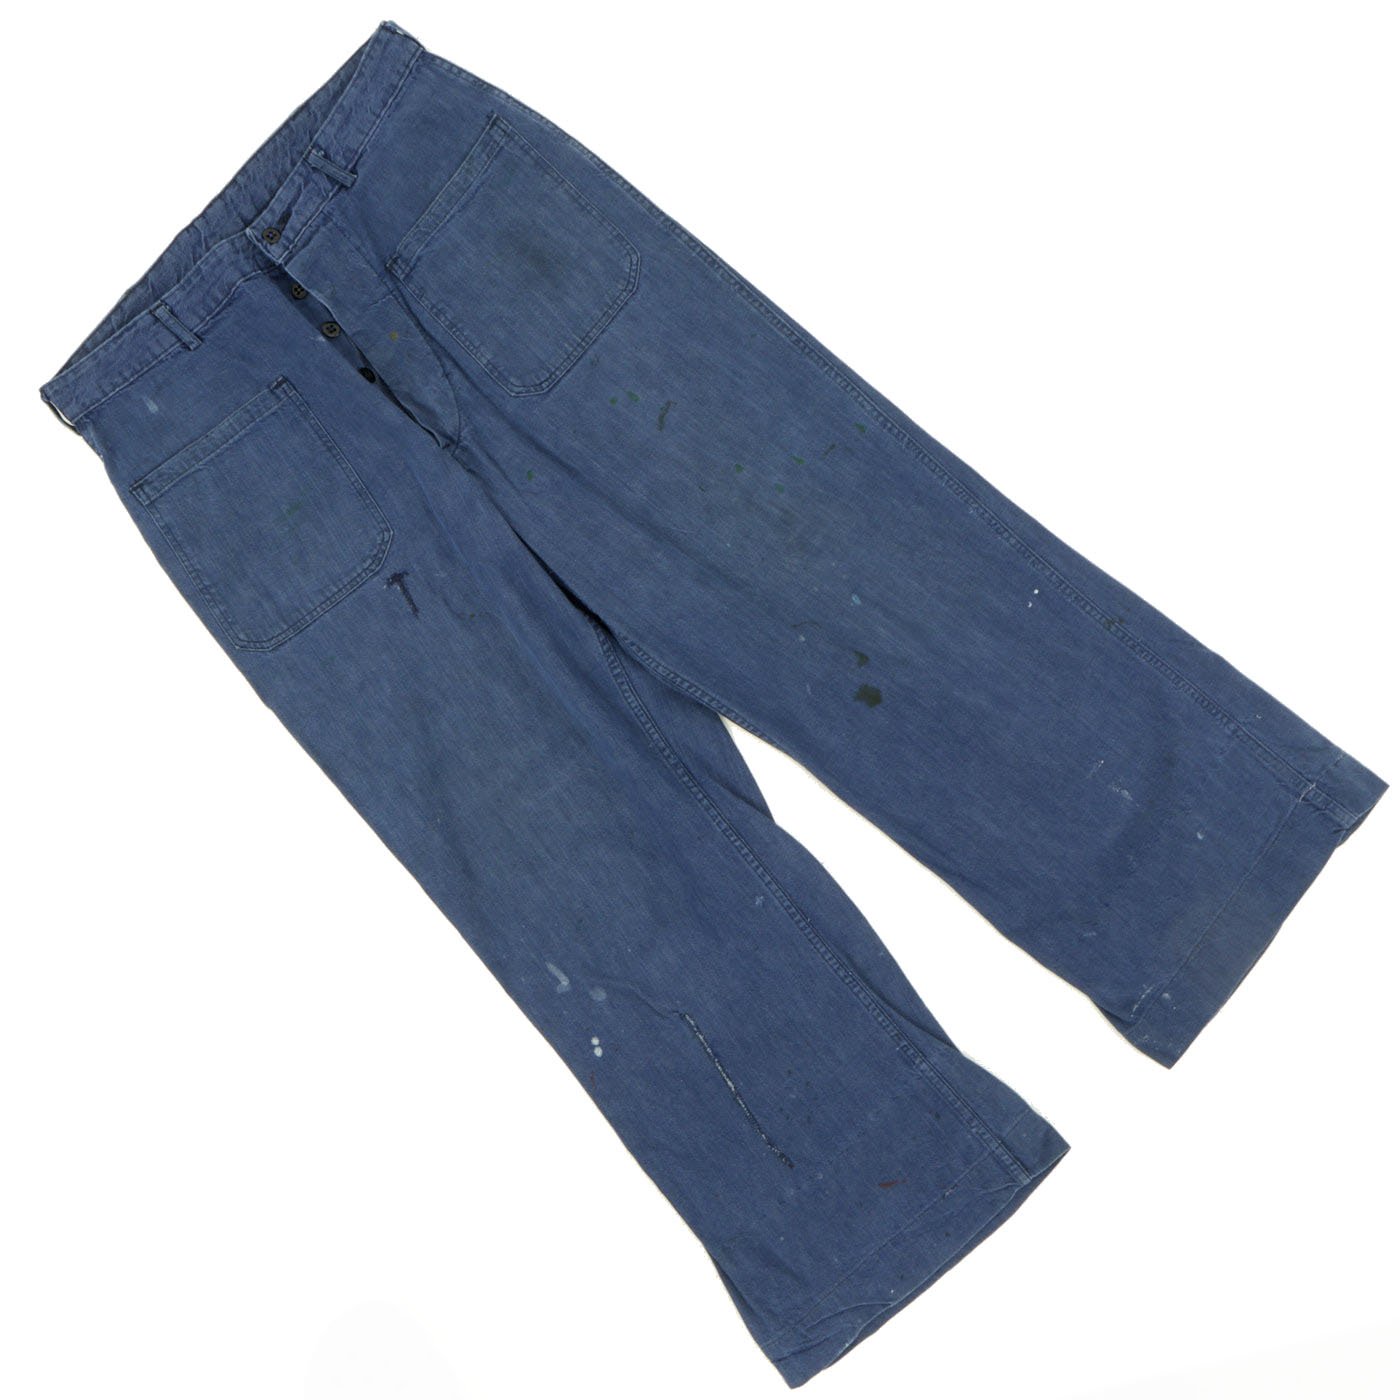 Original U.S. WWII Navy Dungaree Trousers and Chambray Shirt - As Seen ...